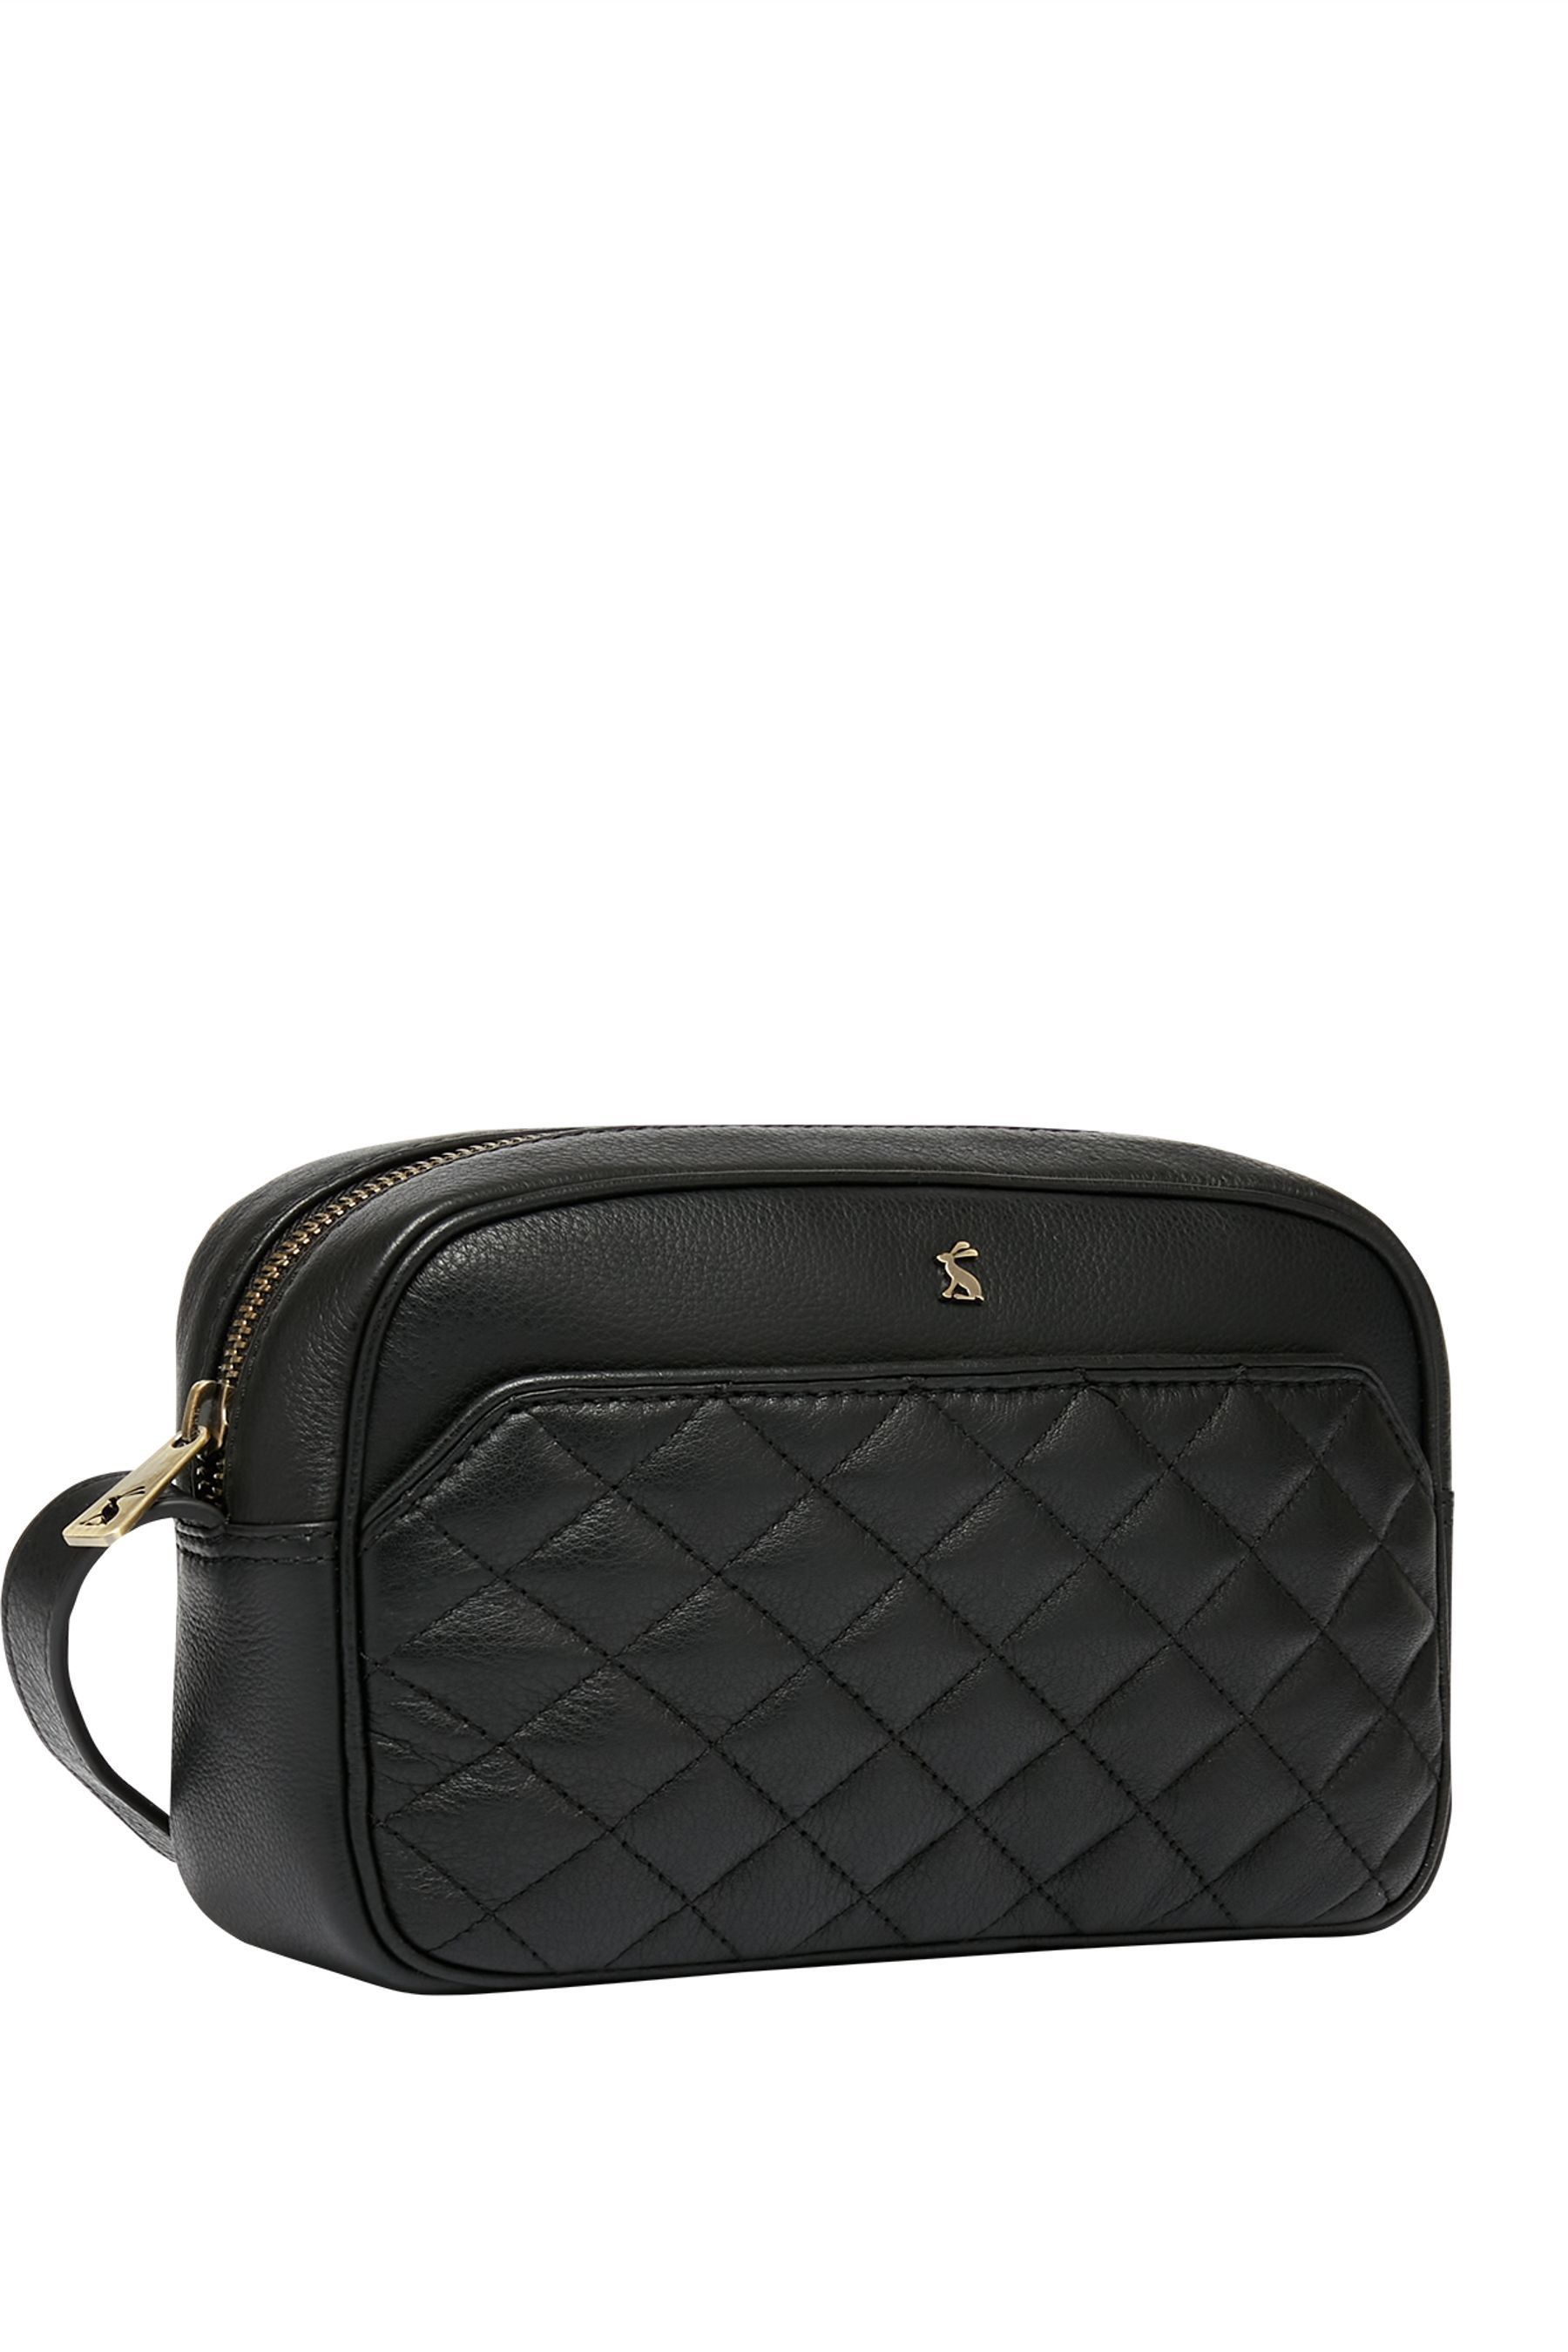 Buy Joules Black Marslow Leather Camera Bag from the Joules online shop